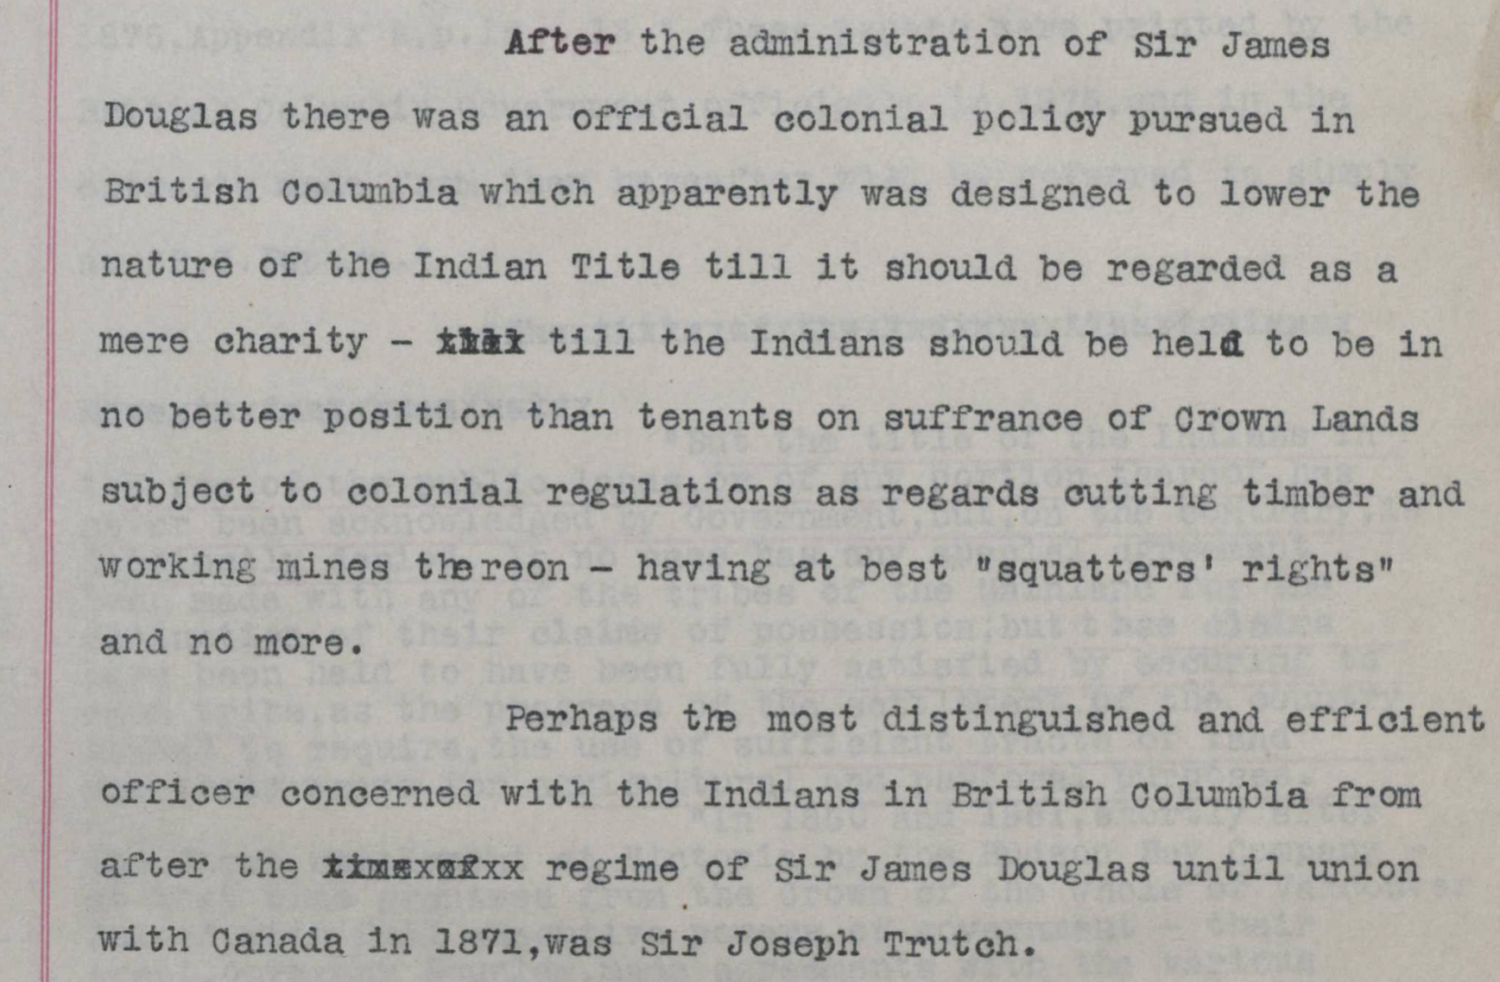 Excerpt from Report on the Indian Title in Canada, a 1909 government report by T.R.E. McInnes.